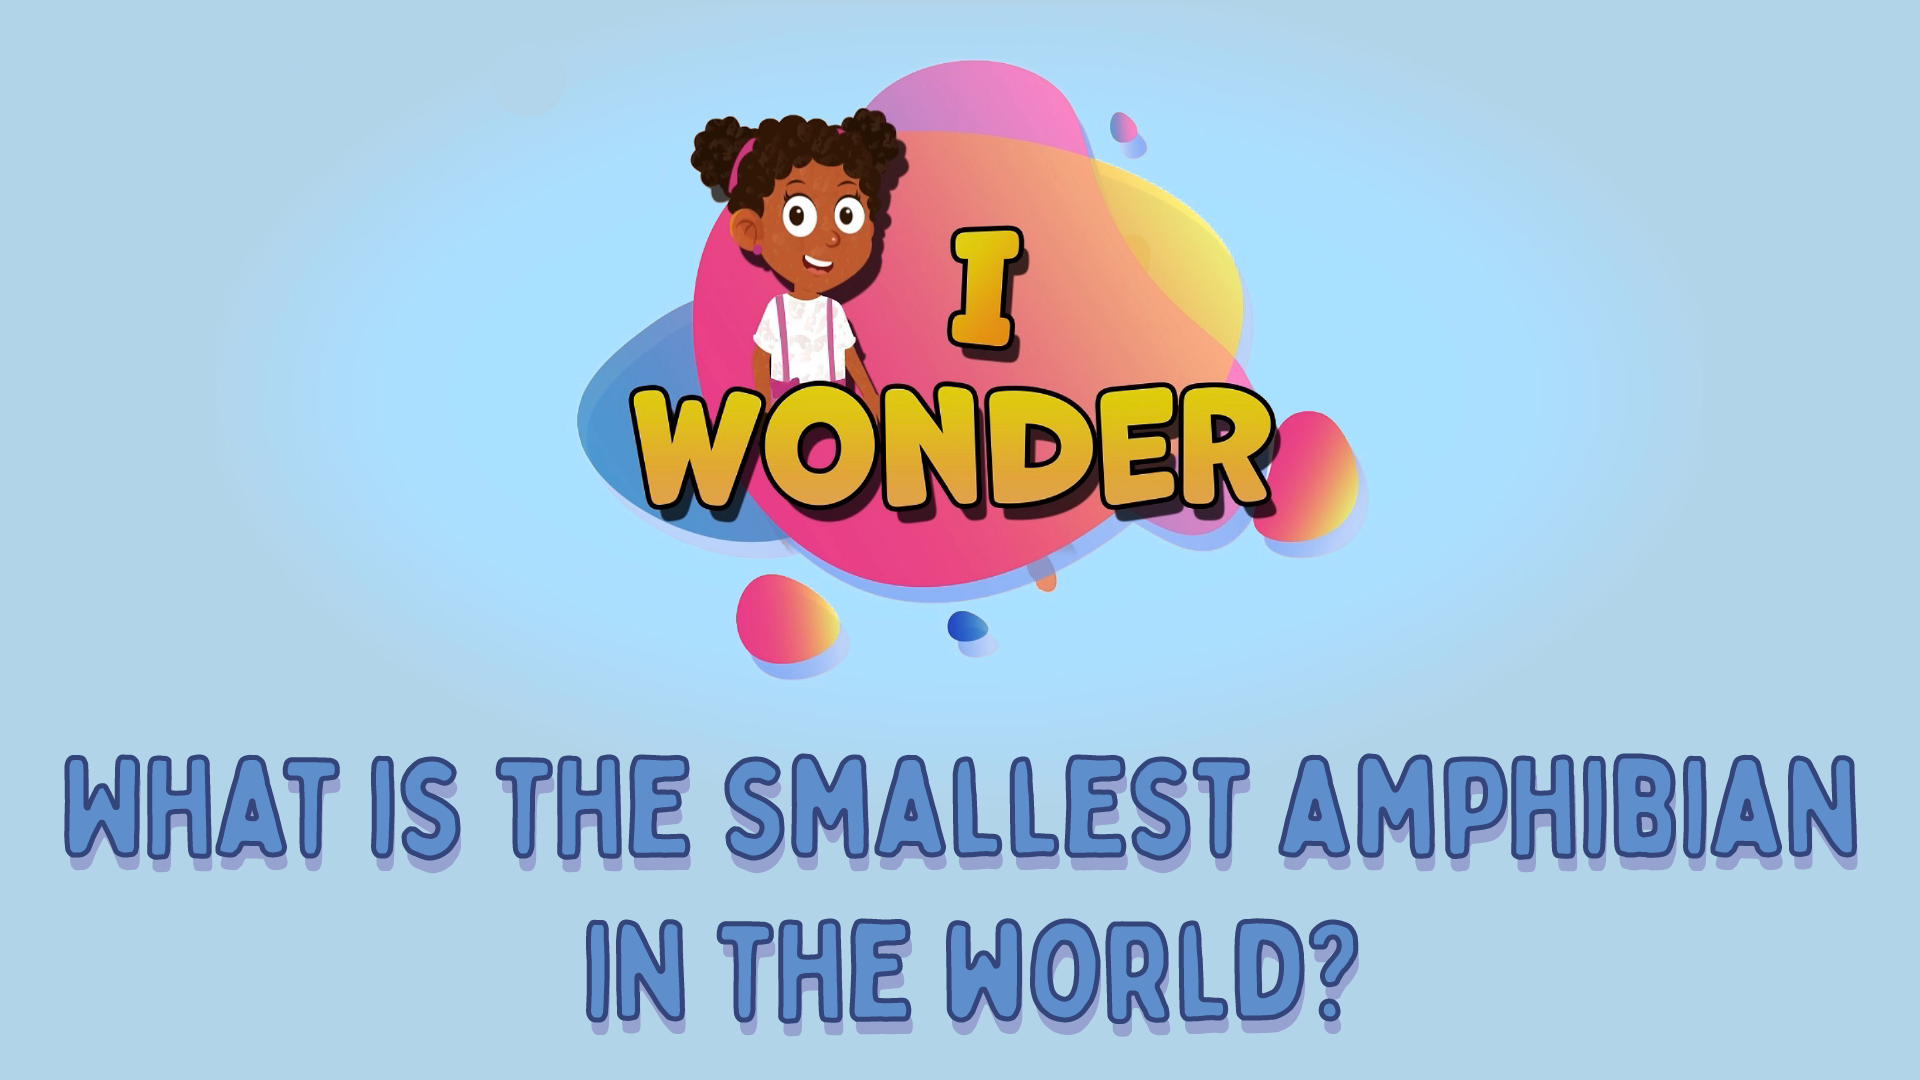 What Is The Smallest Amphibian In The World?